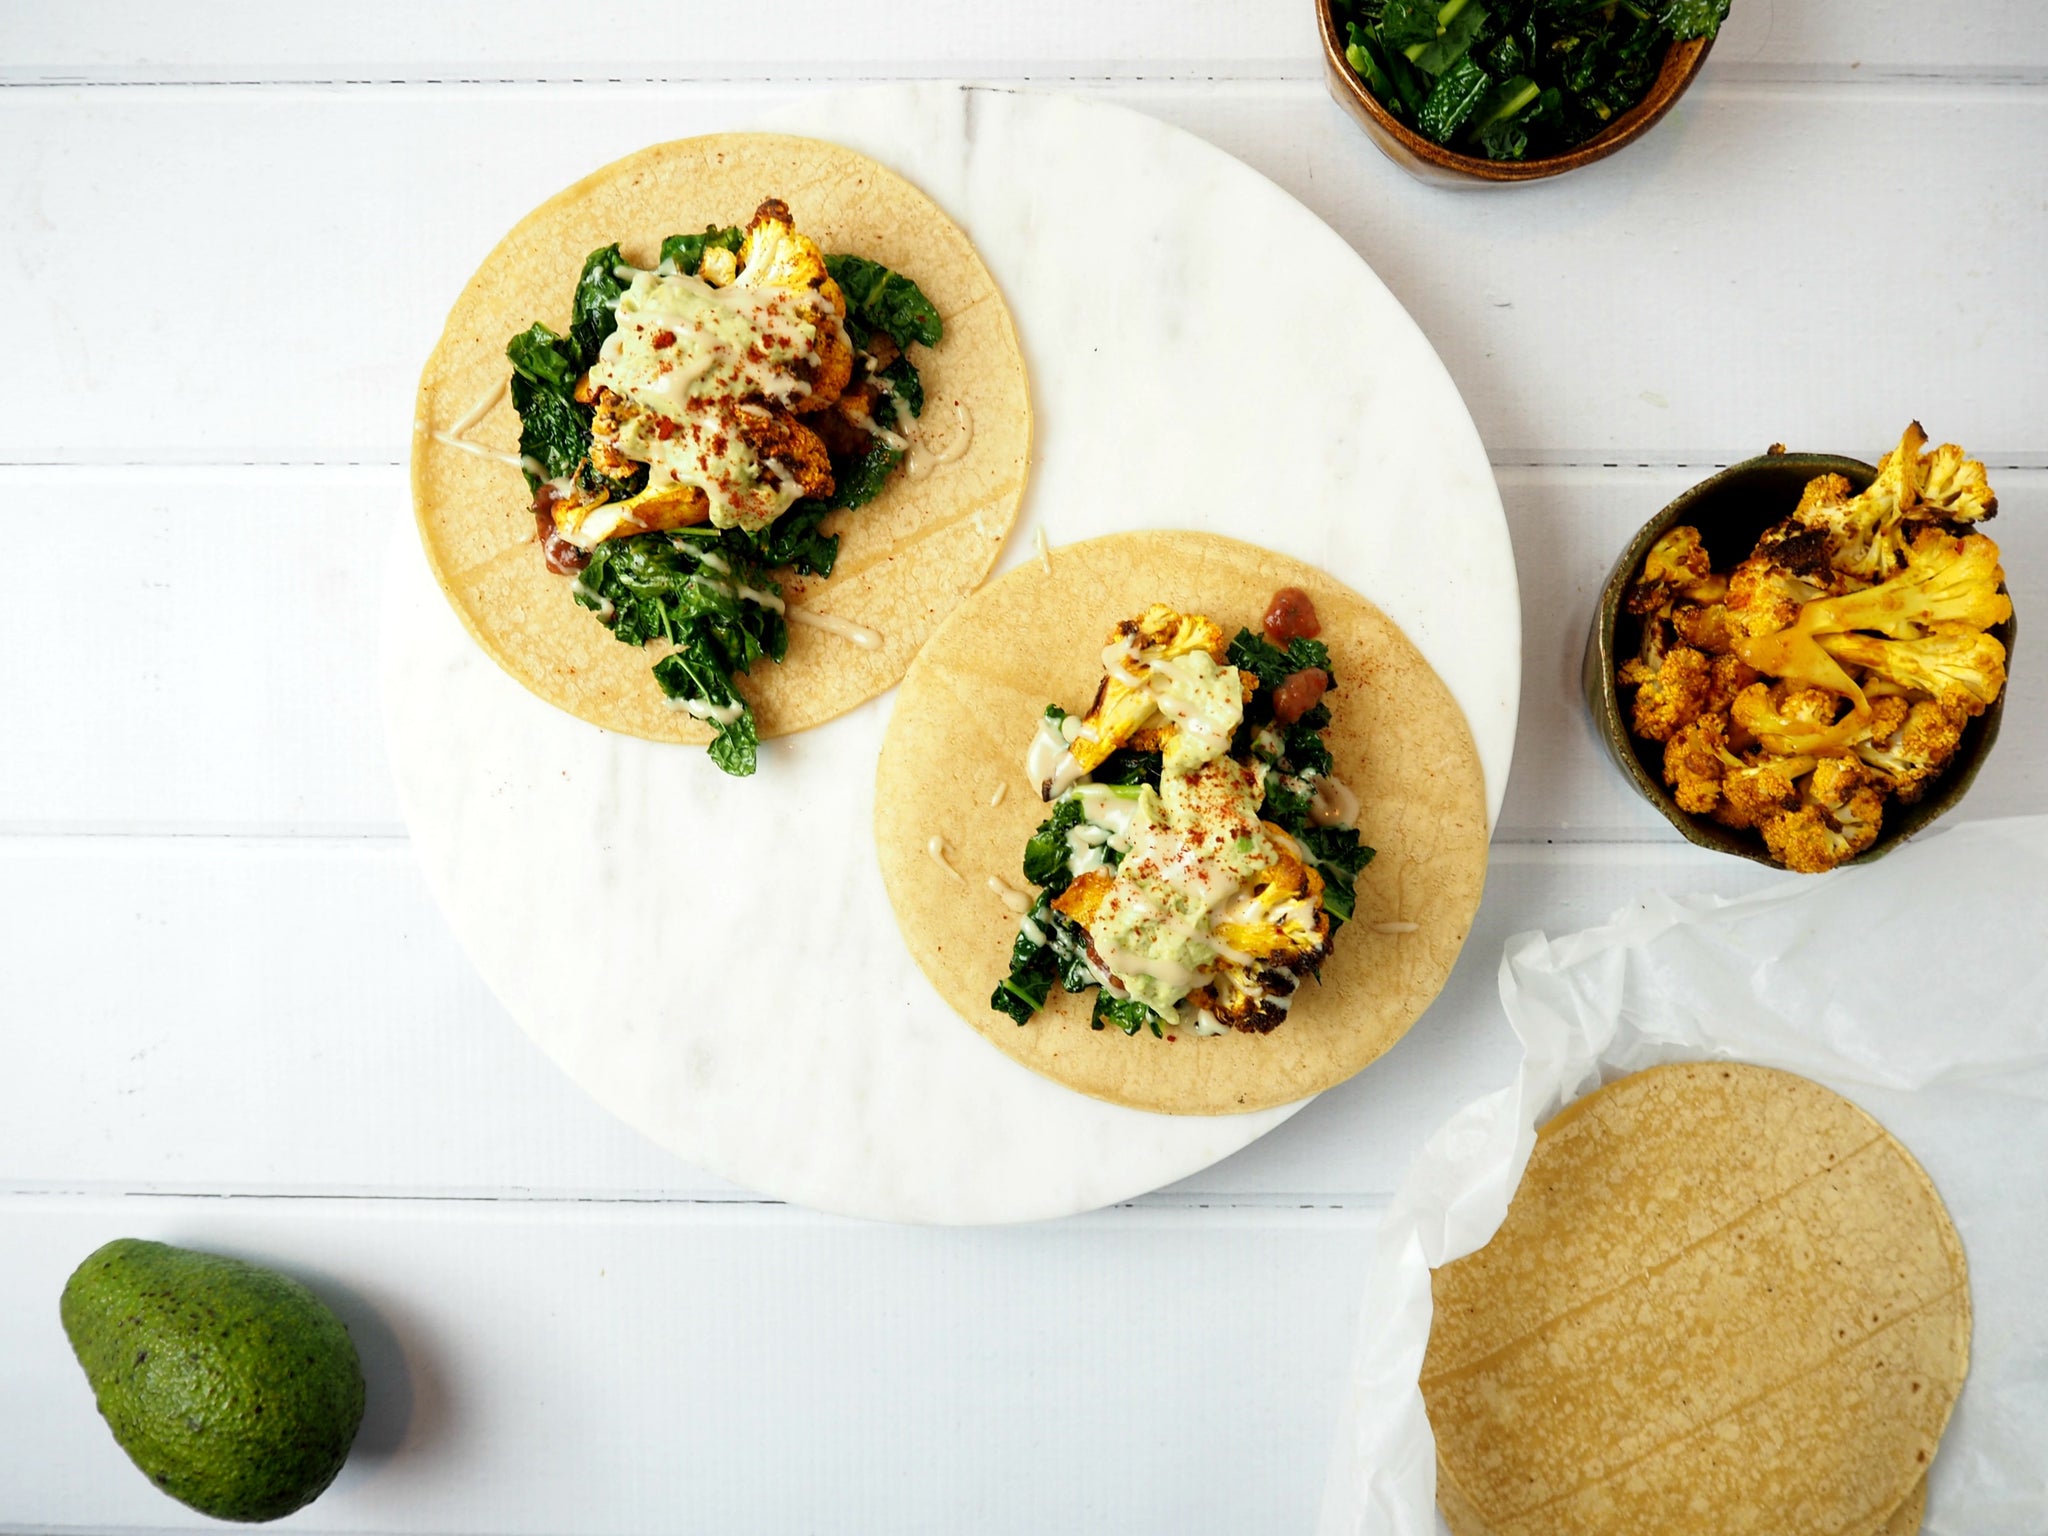 Roasted Cauliflower Tacos with Spicy Kale and Avocado Cream